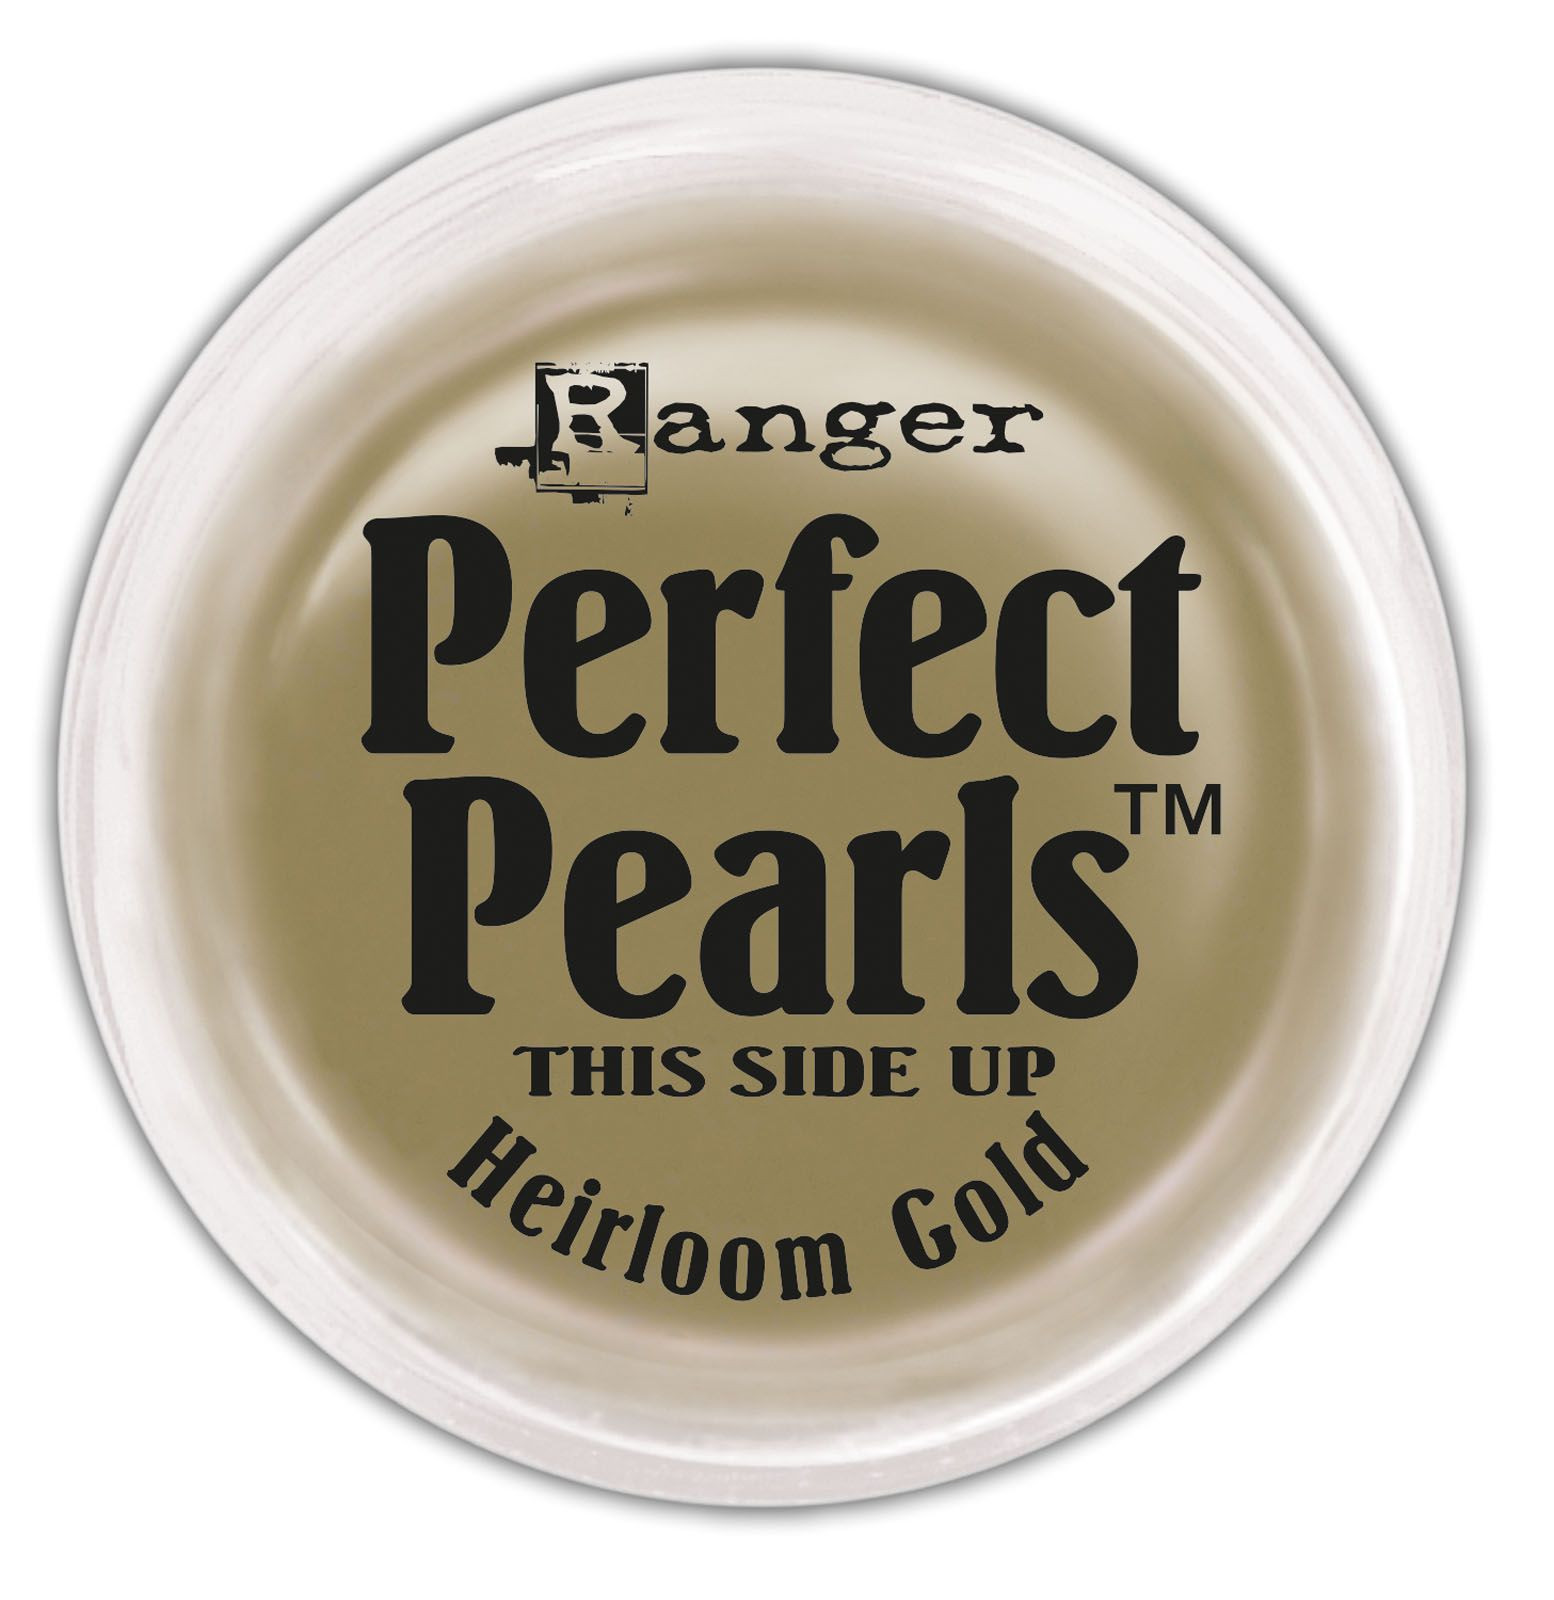 Perfect Pearls Pigment Powder- Heirloom Gold